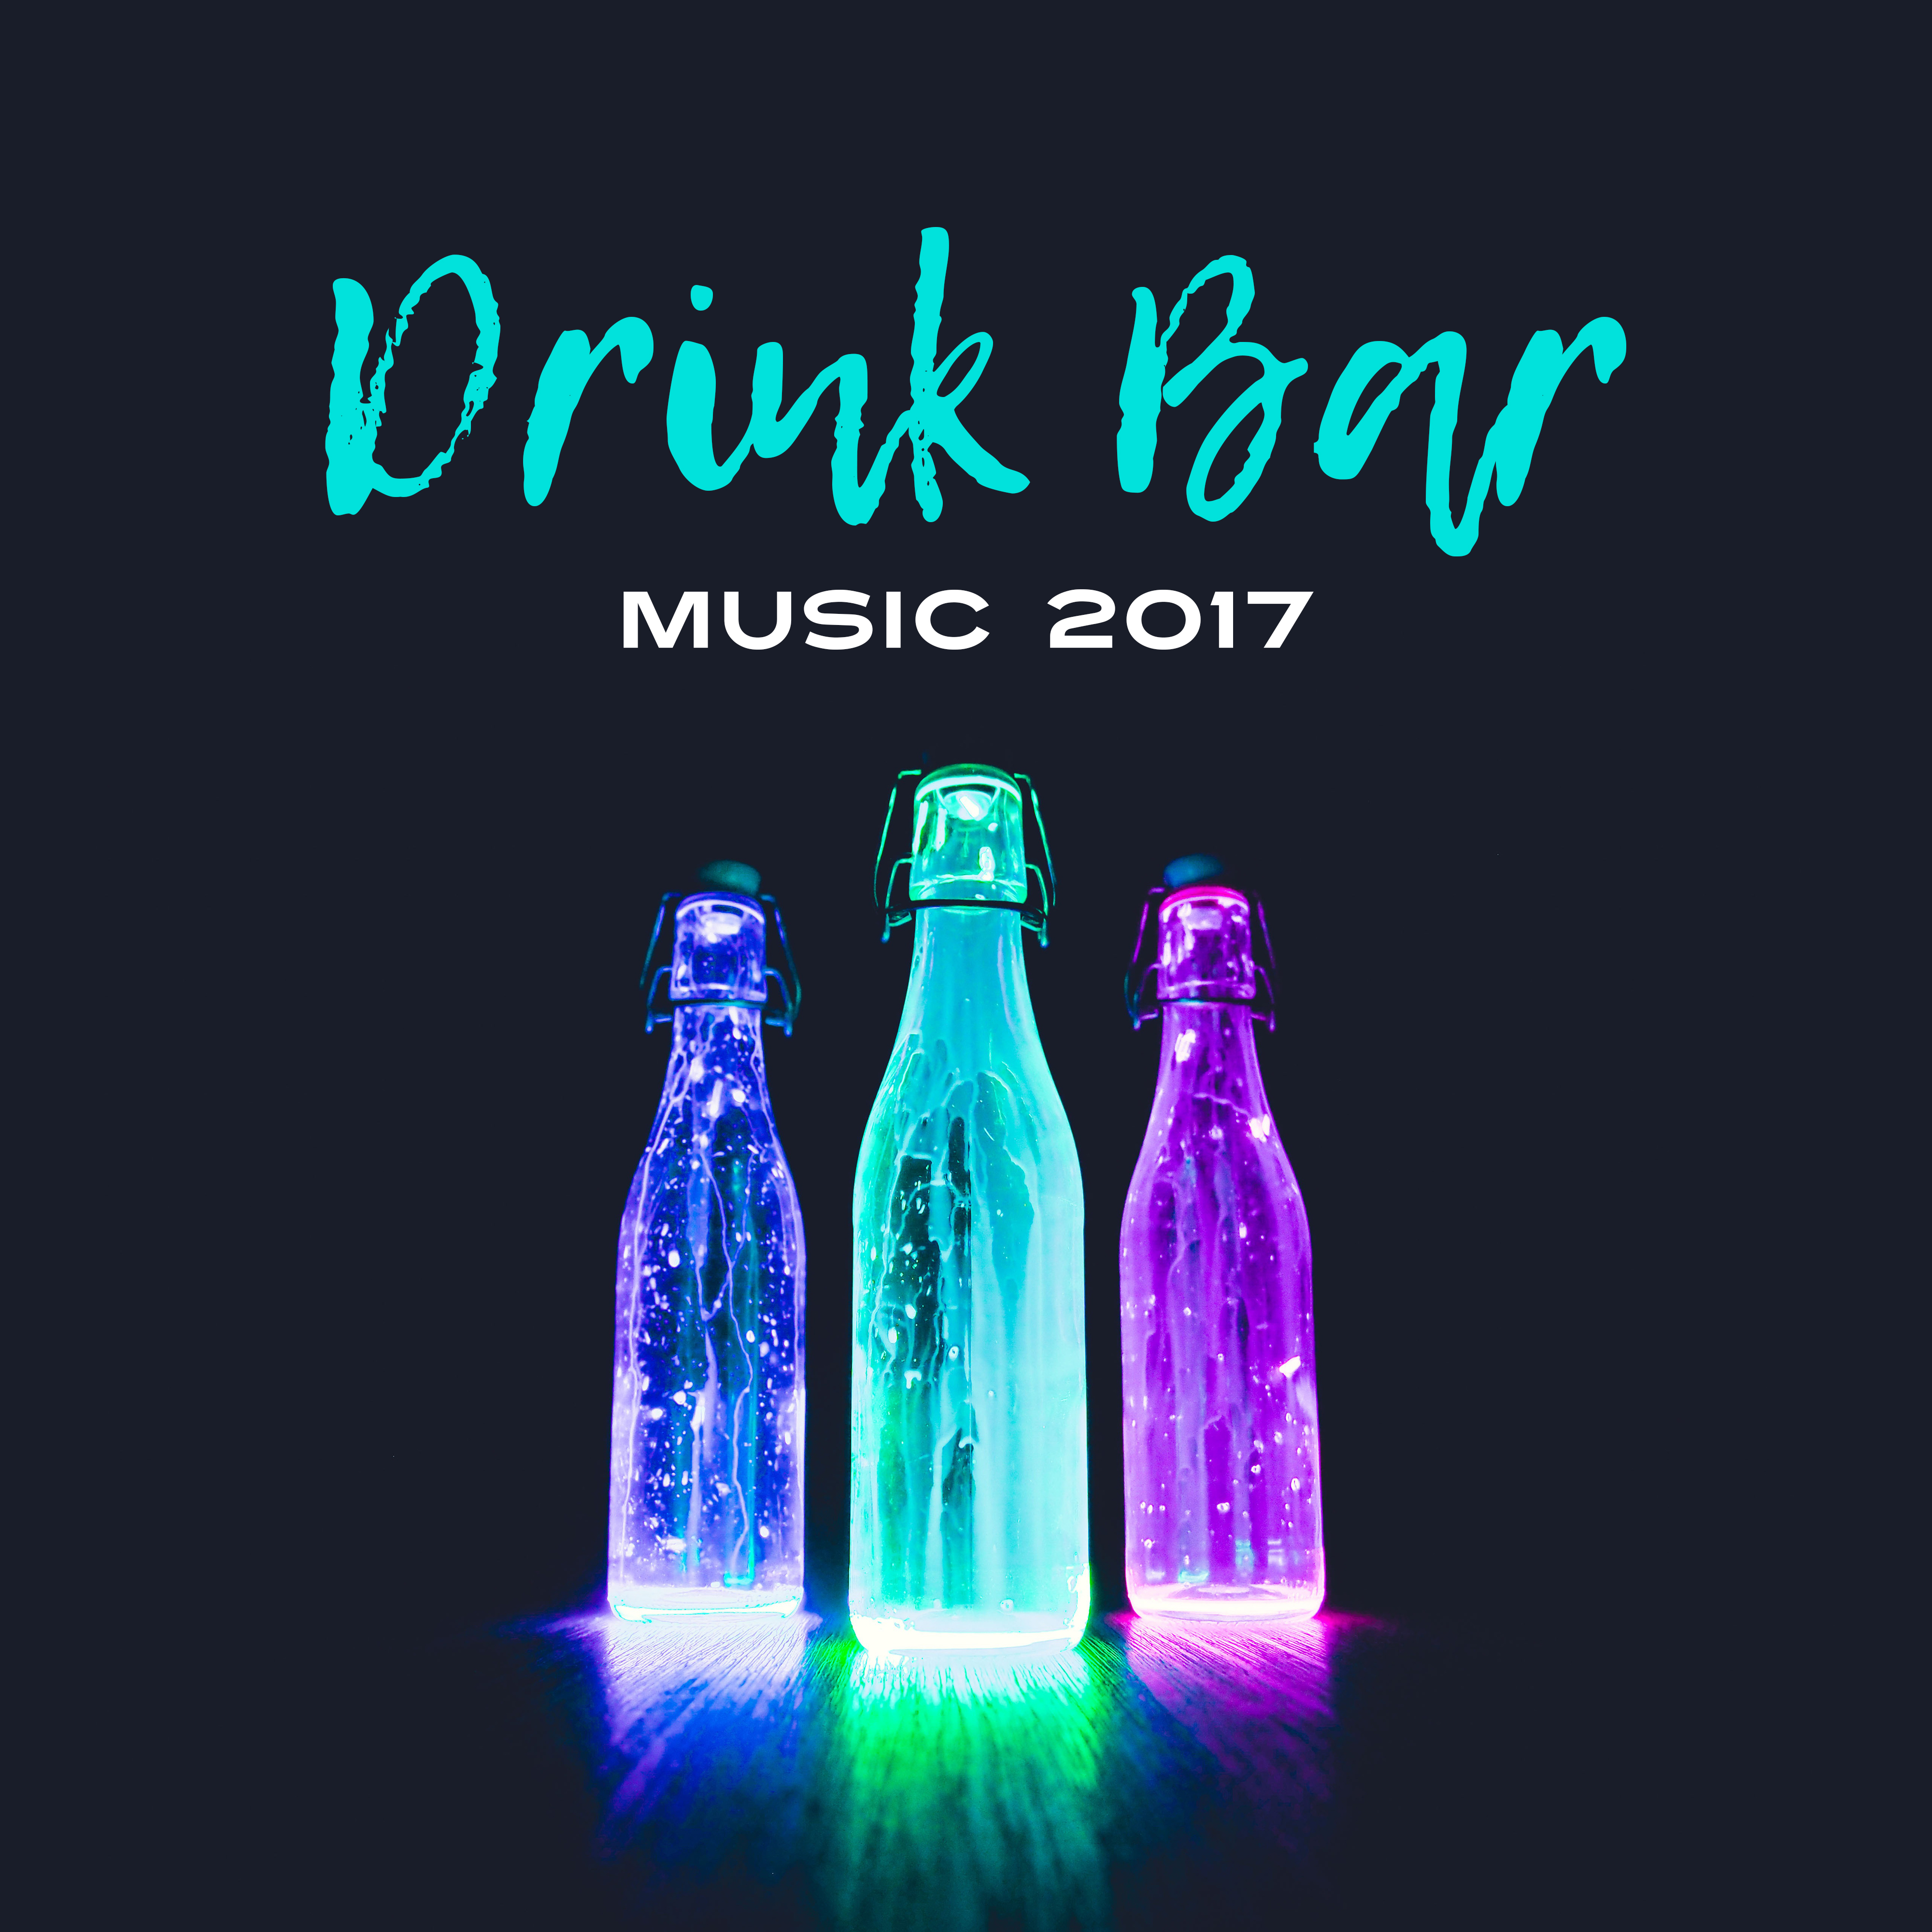 Drink Bar Music 2017 – Chill Out Beats, Party Music, Relax By The Pool, Holiday Vibes